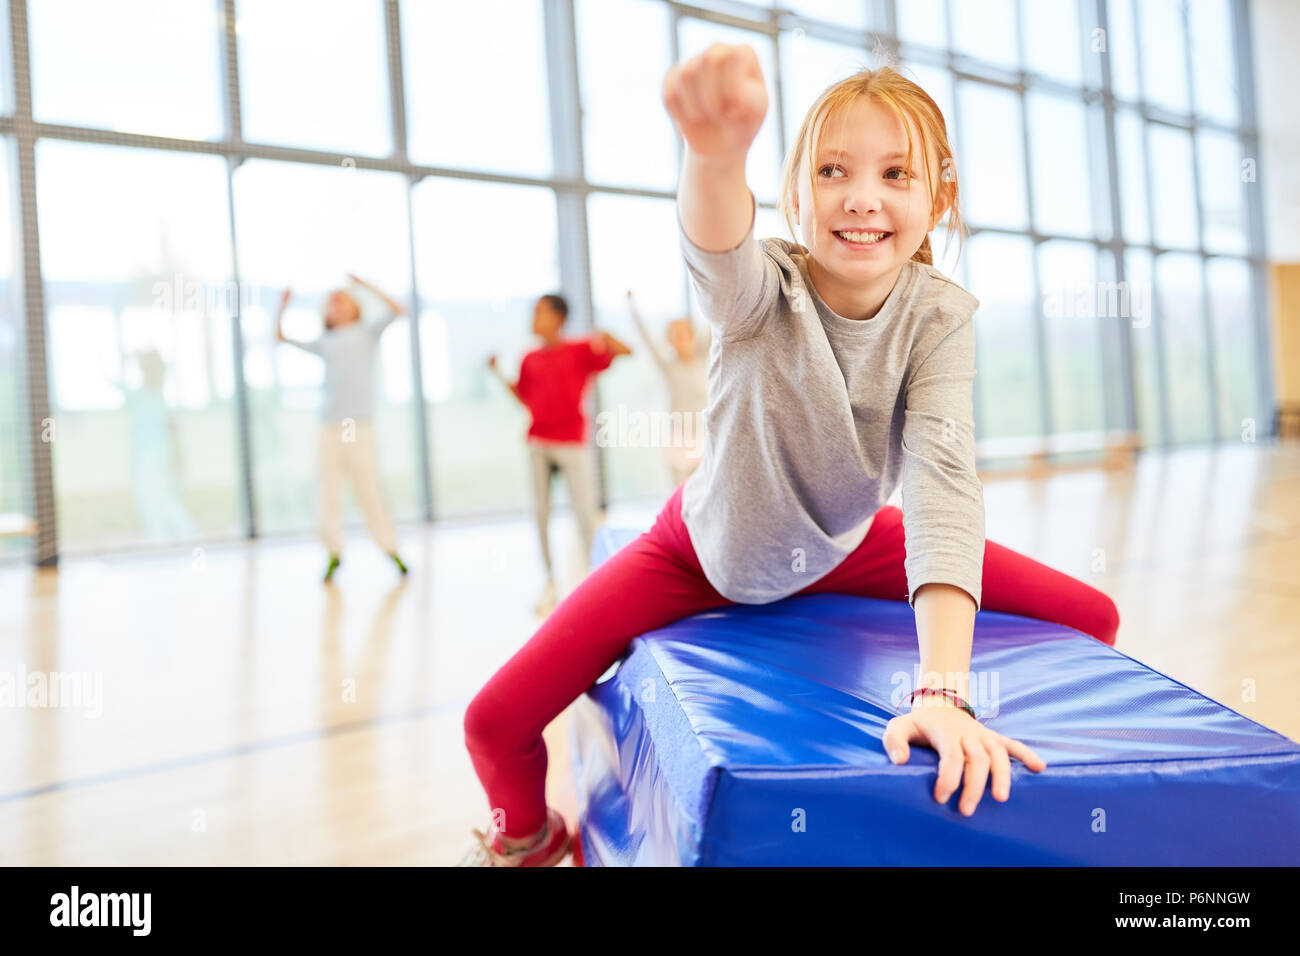 Sporty girl is having fun in physical education after a competition Stock Photo